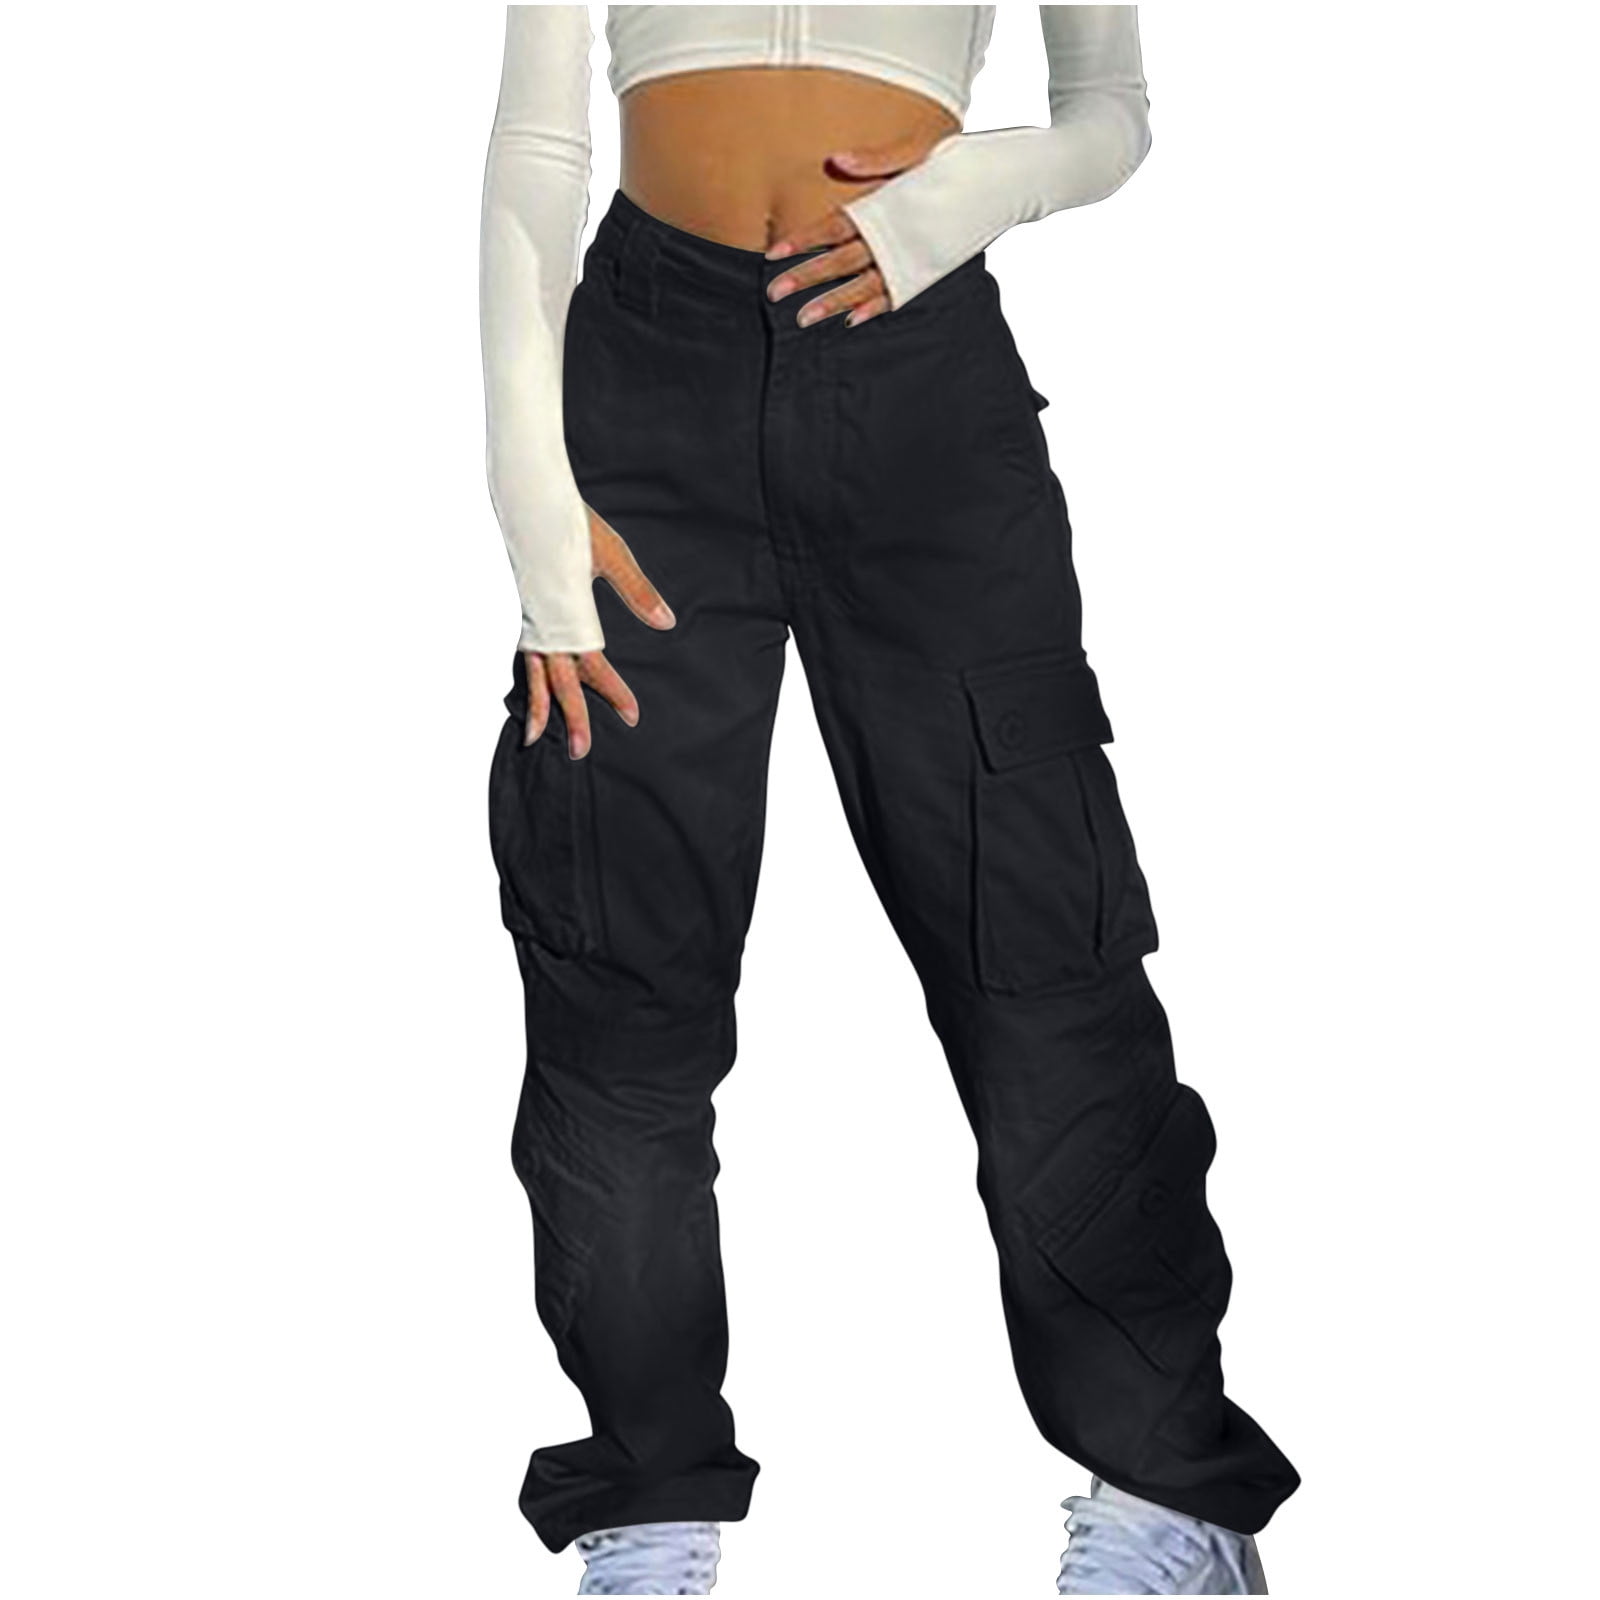 YWDJ Cargo Pants Women Plus With Pockets Denim Casual Long Pant Straight  Leg Solid Pants Hippie Punk Trousers Jogger Loose Overalls s A Popular  Choice for Everyday Wear Work Casual Event 29-Black